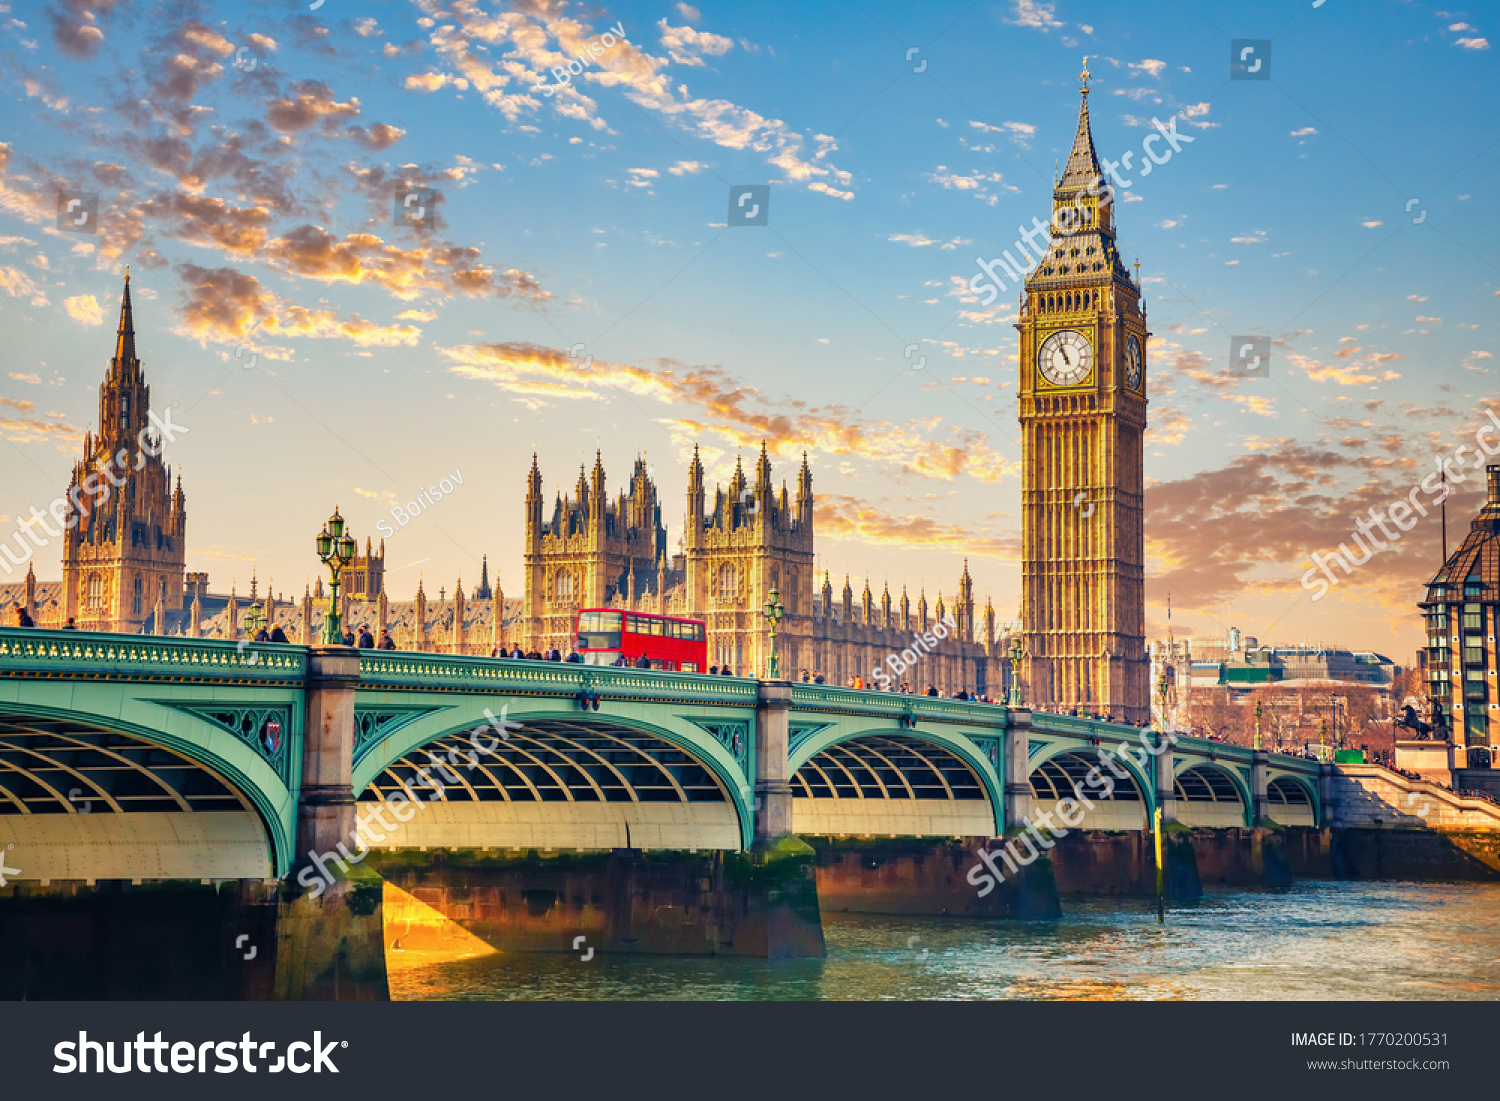 Designart TAP7765-39-32  Big Ben UK and House of Parliament Cityscape Photo Blanket Décor Art for Home and Office Wall Tapestry Medium 39 x 32 Created On Lightweight Polyester Fabric